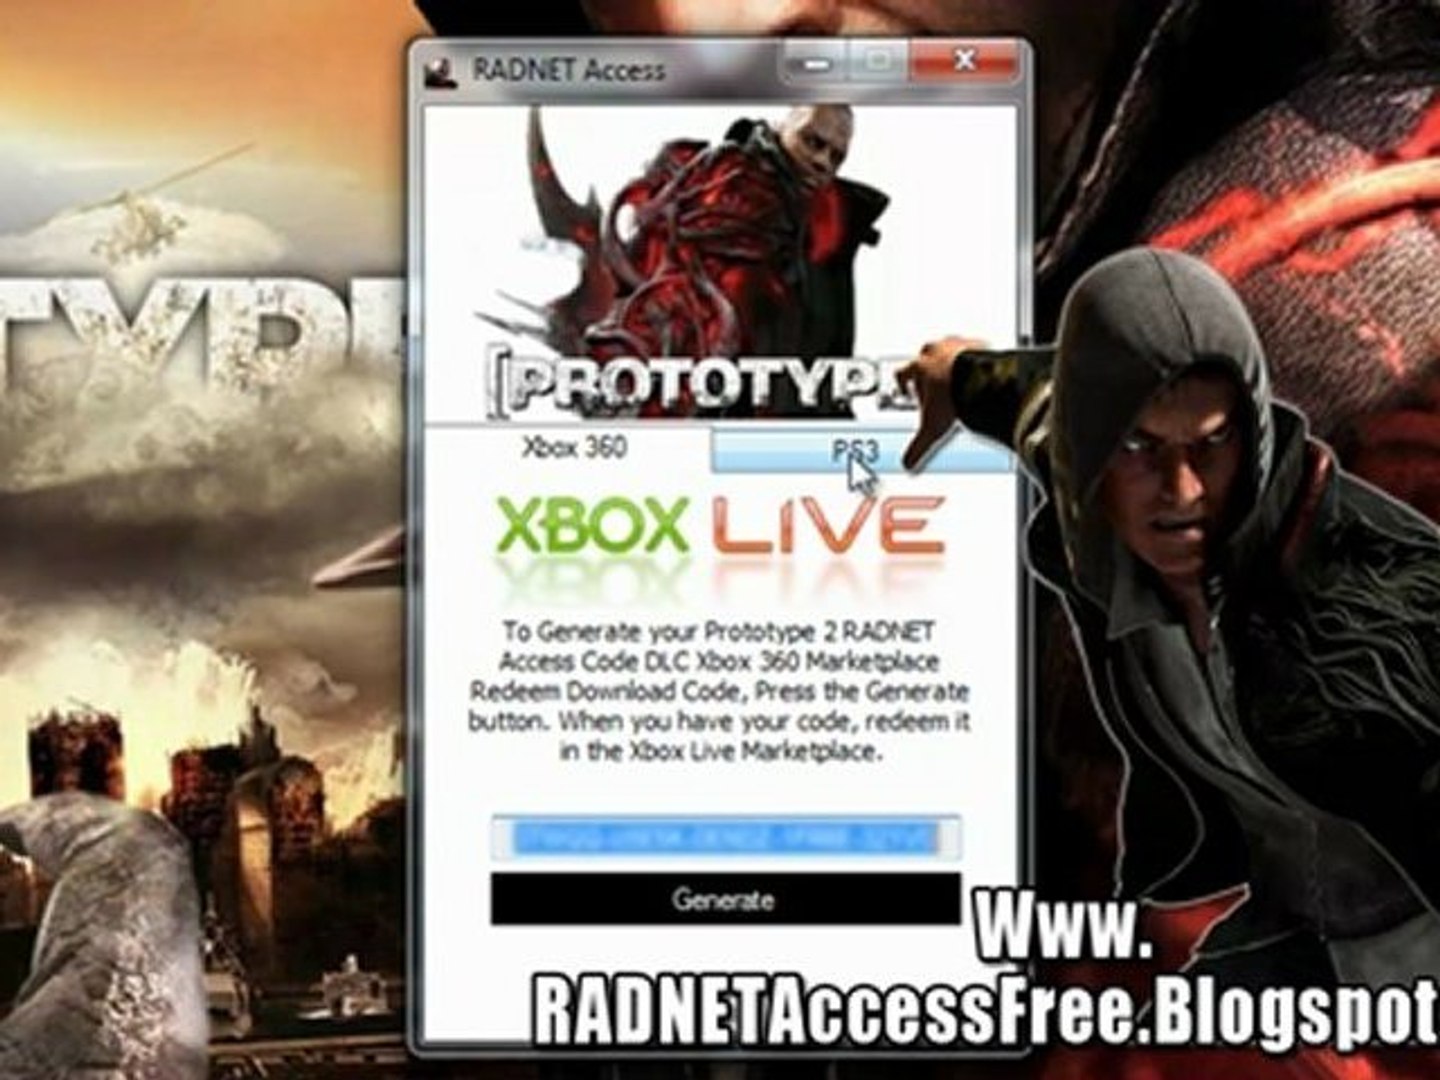 Prototype 2 Radnet Access Dlc Free On Xbox 360 And Ps3 Video Dailymotion